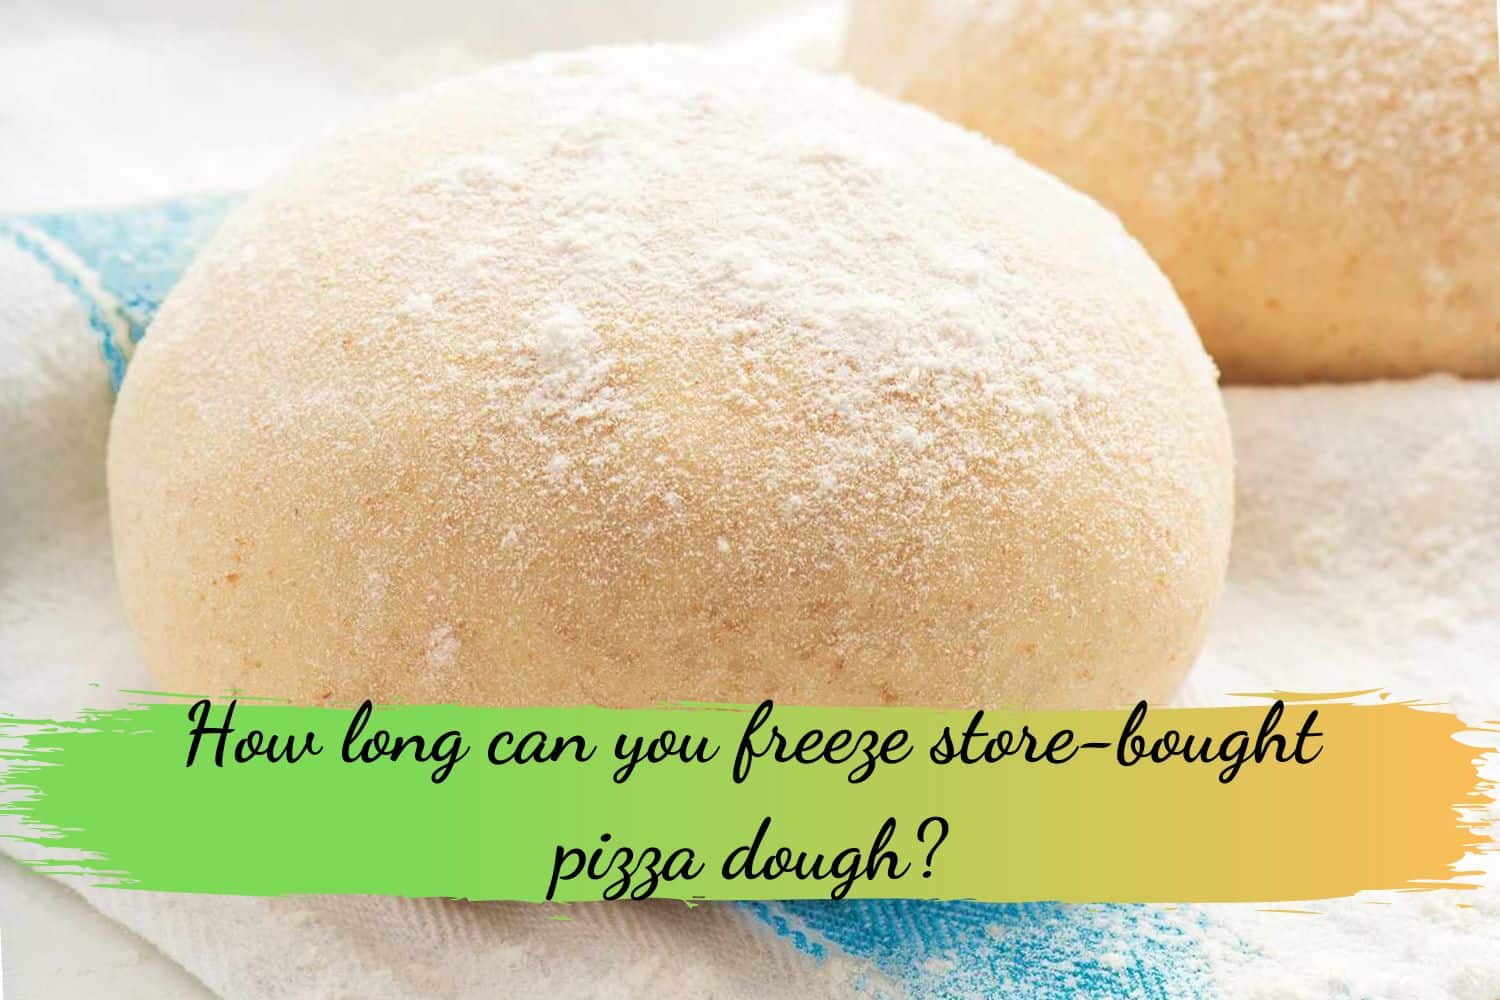 How long can you freeze store-bought pizza dough?